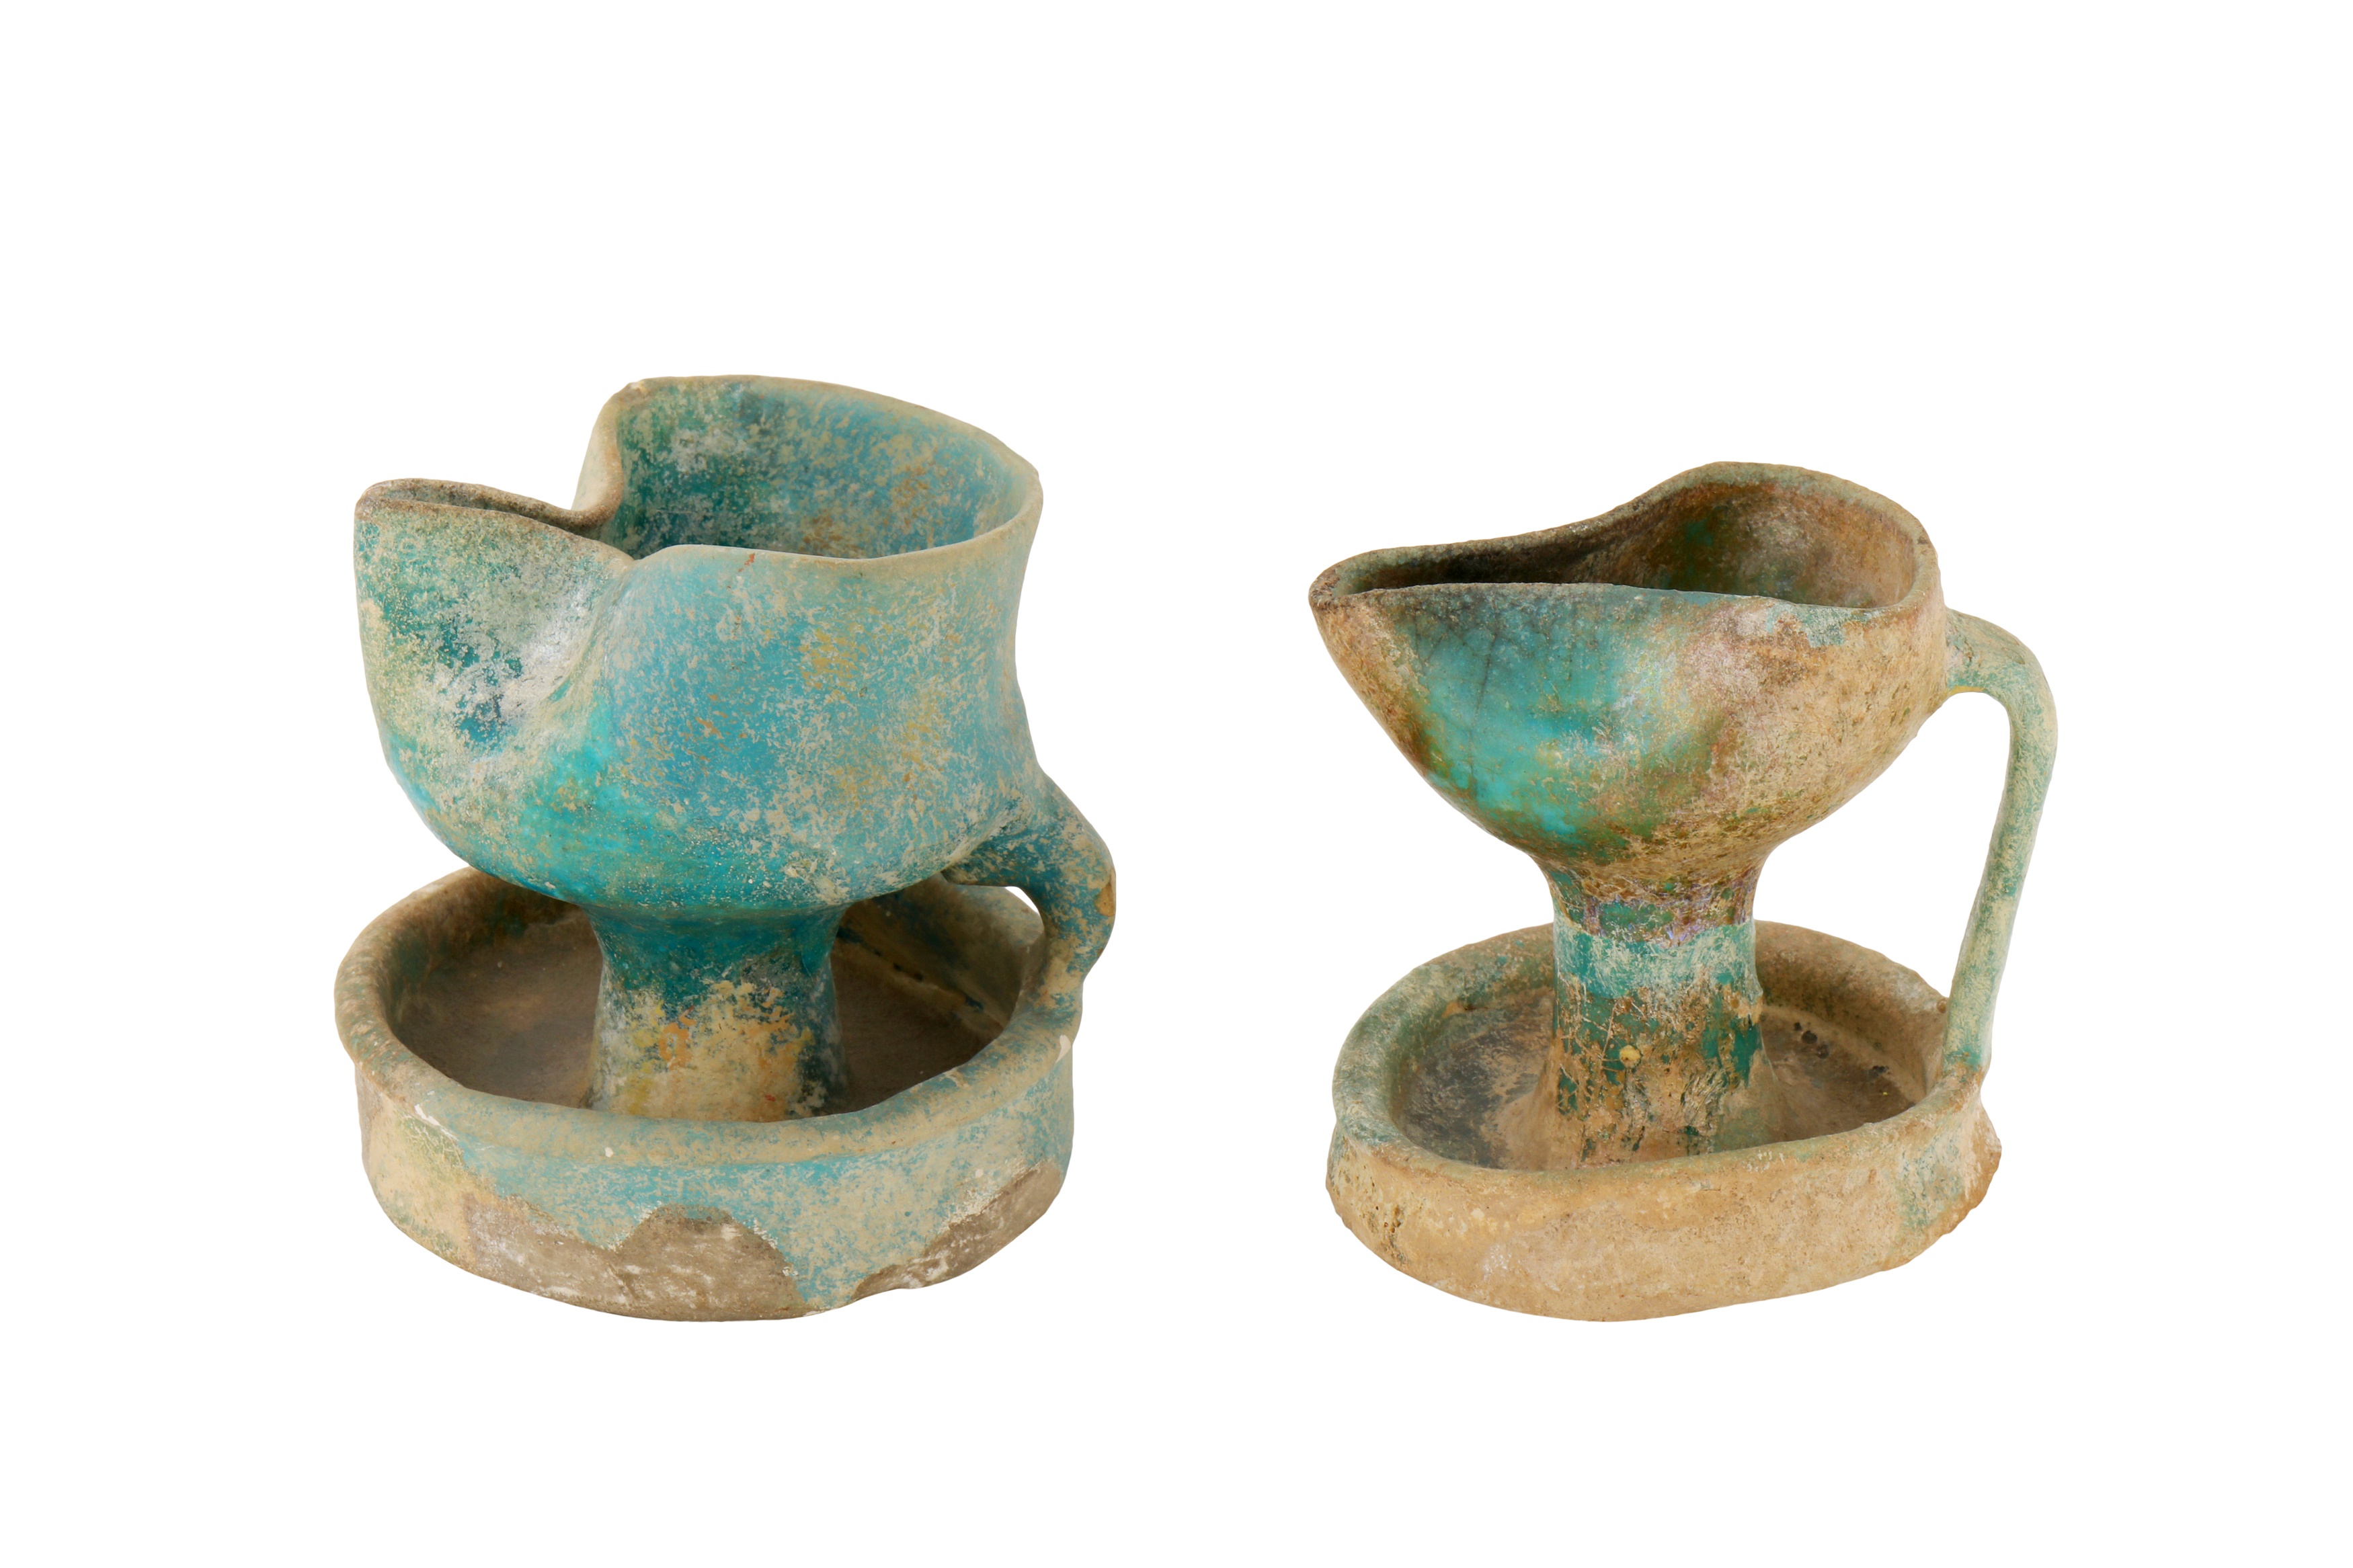 TWO 12TH-13TH CENTURY ANDALUSIAN SPANISH ALMOHAD TURQUOISE GLAZED OIL LAMPS